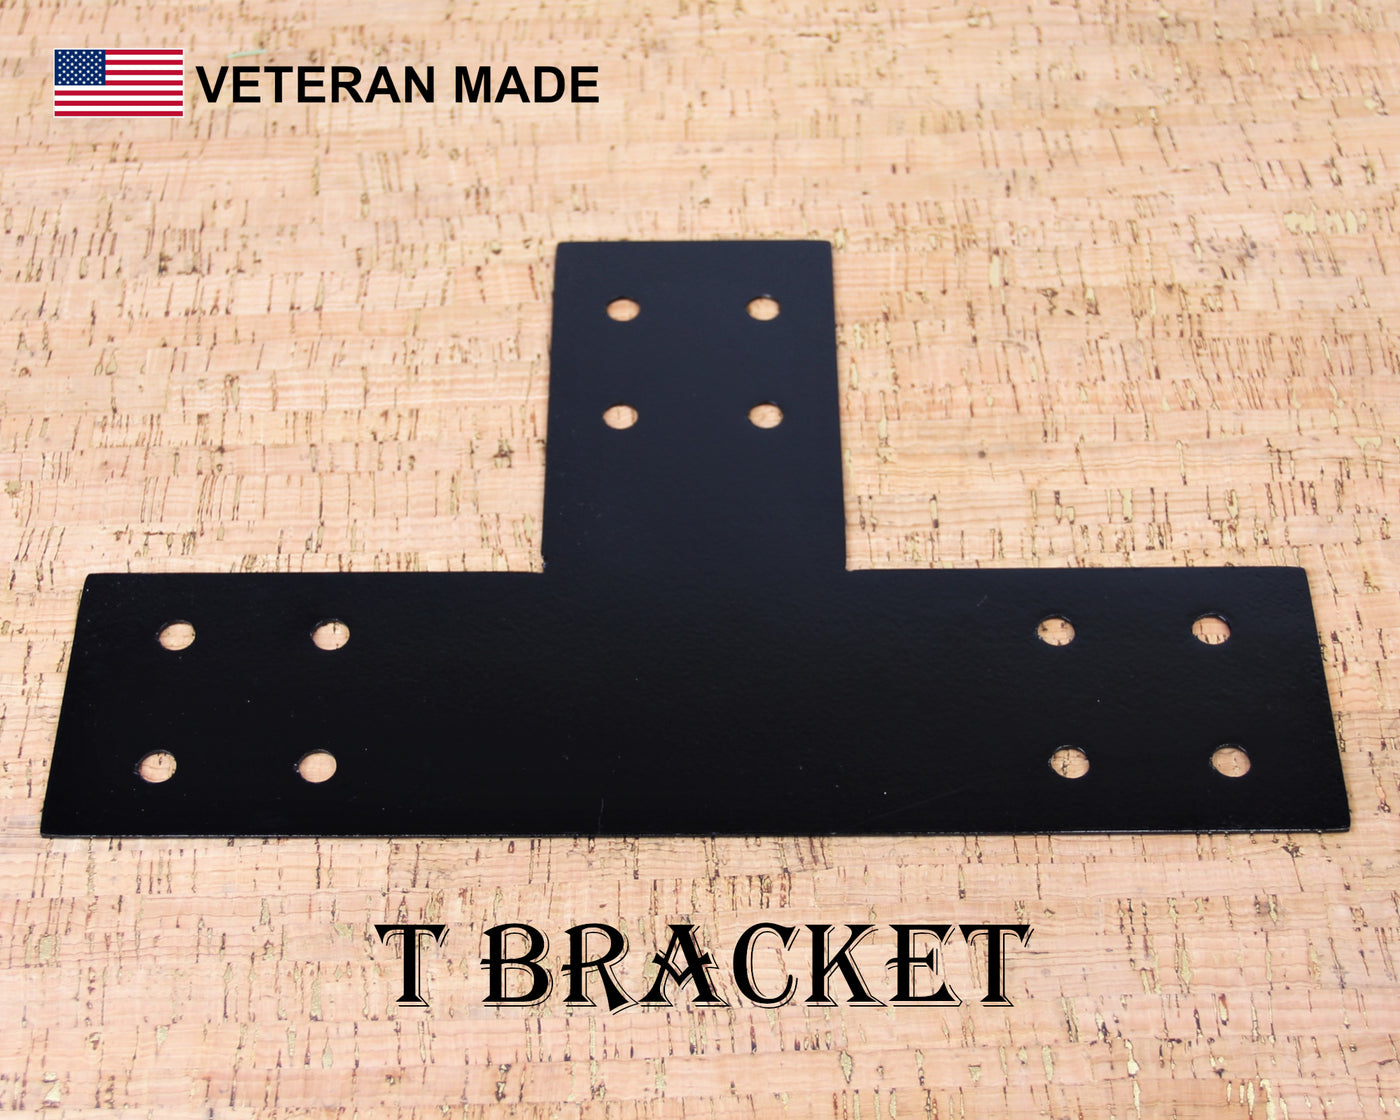 Brackets for 4x4 Dimensional Lumber - Madison Iron and Wood - Brackets & Reinforcement Braces - metal outdoor decor - Steel deocrations - american made products - veteran owned business products - fencing decorations - fencing supplies - custom wall decorations - personalized wall signs - steel - decorative post caps - steel post caps - metal post caps - brackets - structural brackets - home improvement - easter - easter decorations - easter gift - easter yard decor